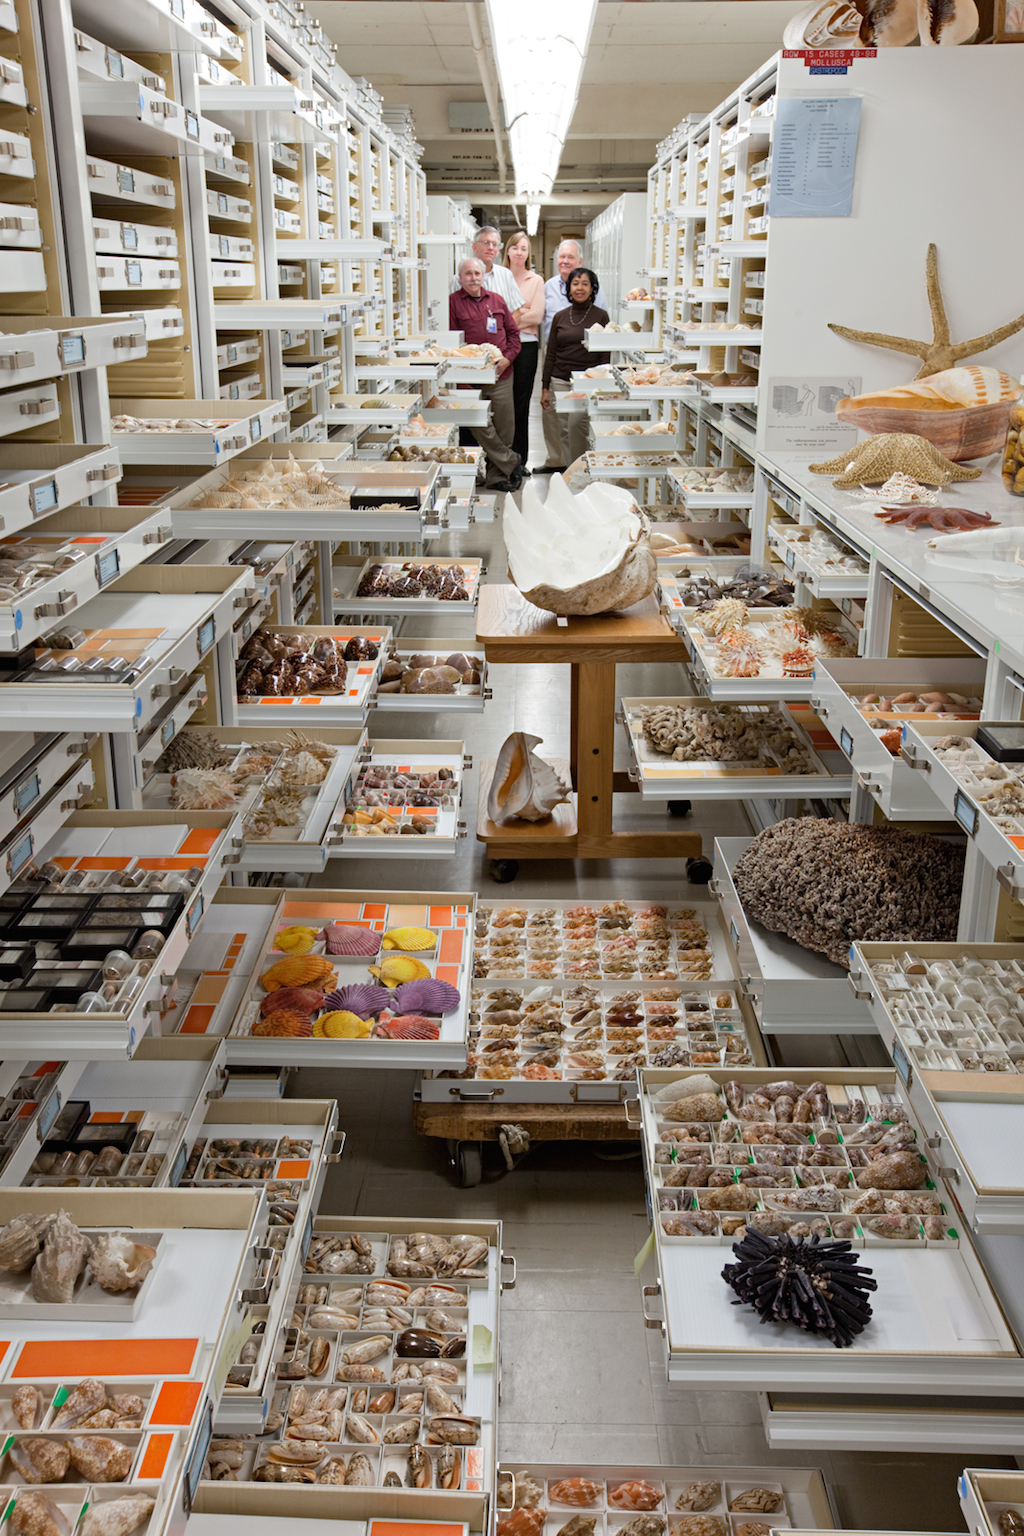 Collections from the Department of Invertebrate Zoology are diplayed at the Smithsonian Institution's National Museum of Natural History. Invertebrate Zoology Staff present: Paul Greenhall, Robert Hershler, Ellen Strong, Jerry Harasewych, and Linda Cole.